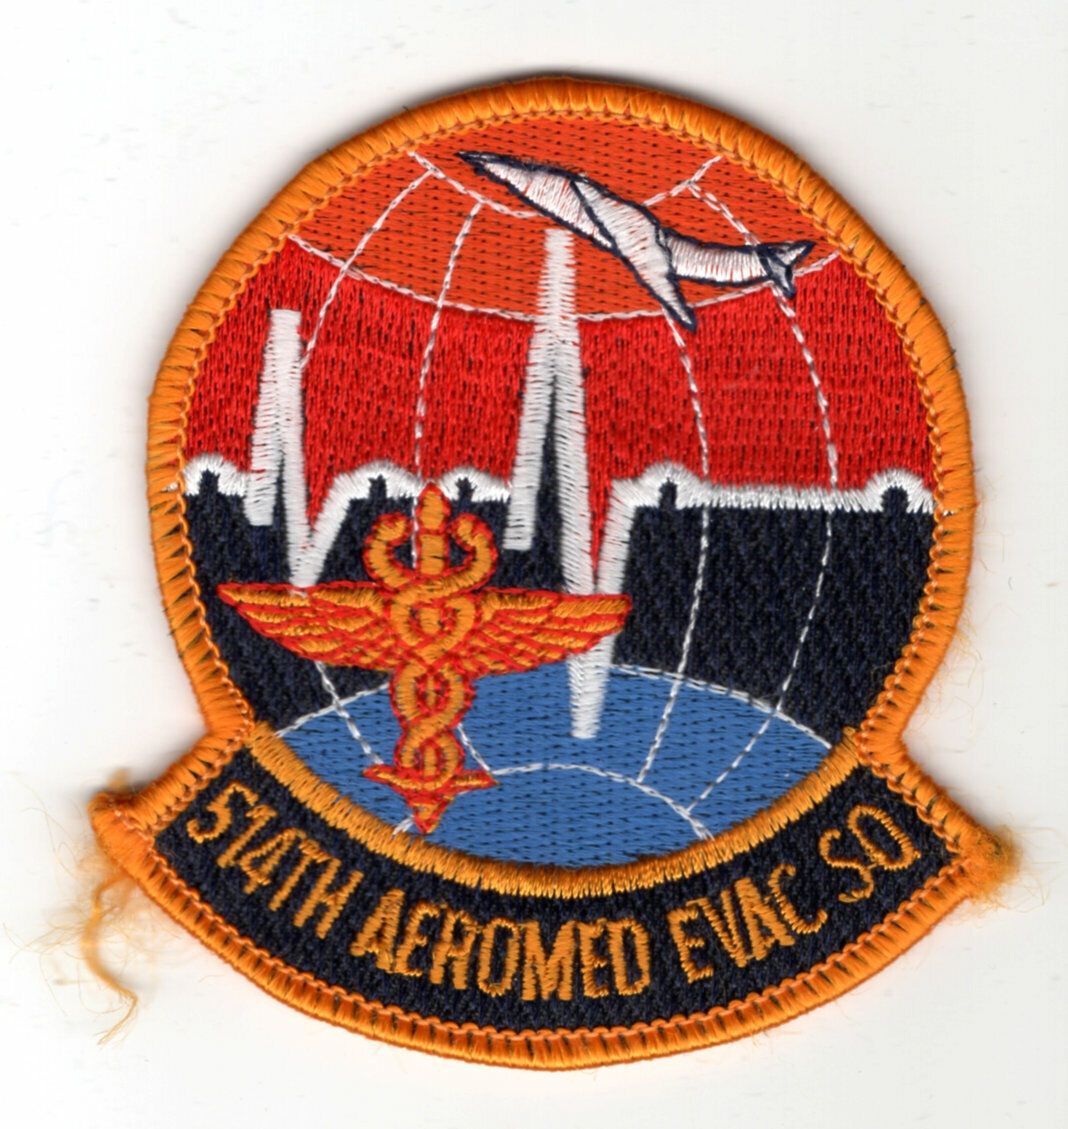 OLD USAF patch - 54th Aeromedical Evacuation Squadron - McGuire AFB 